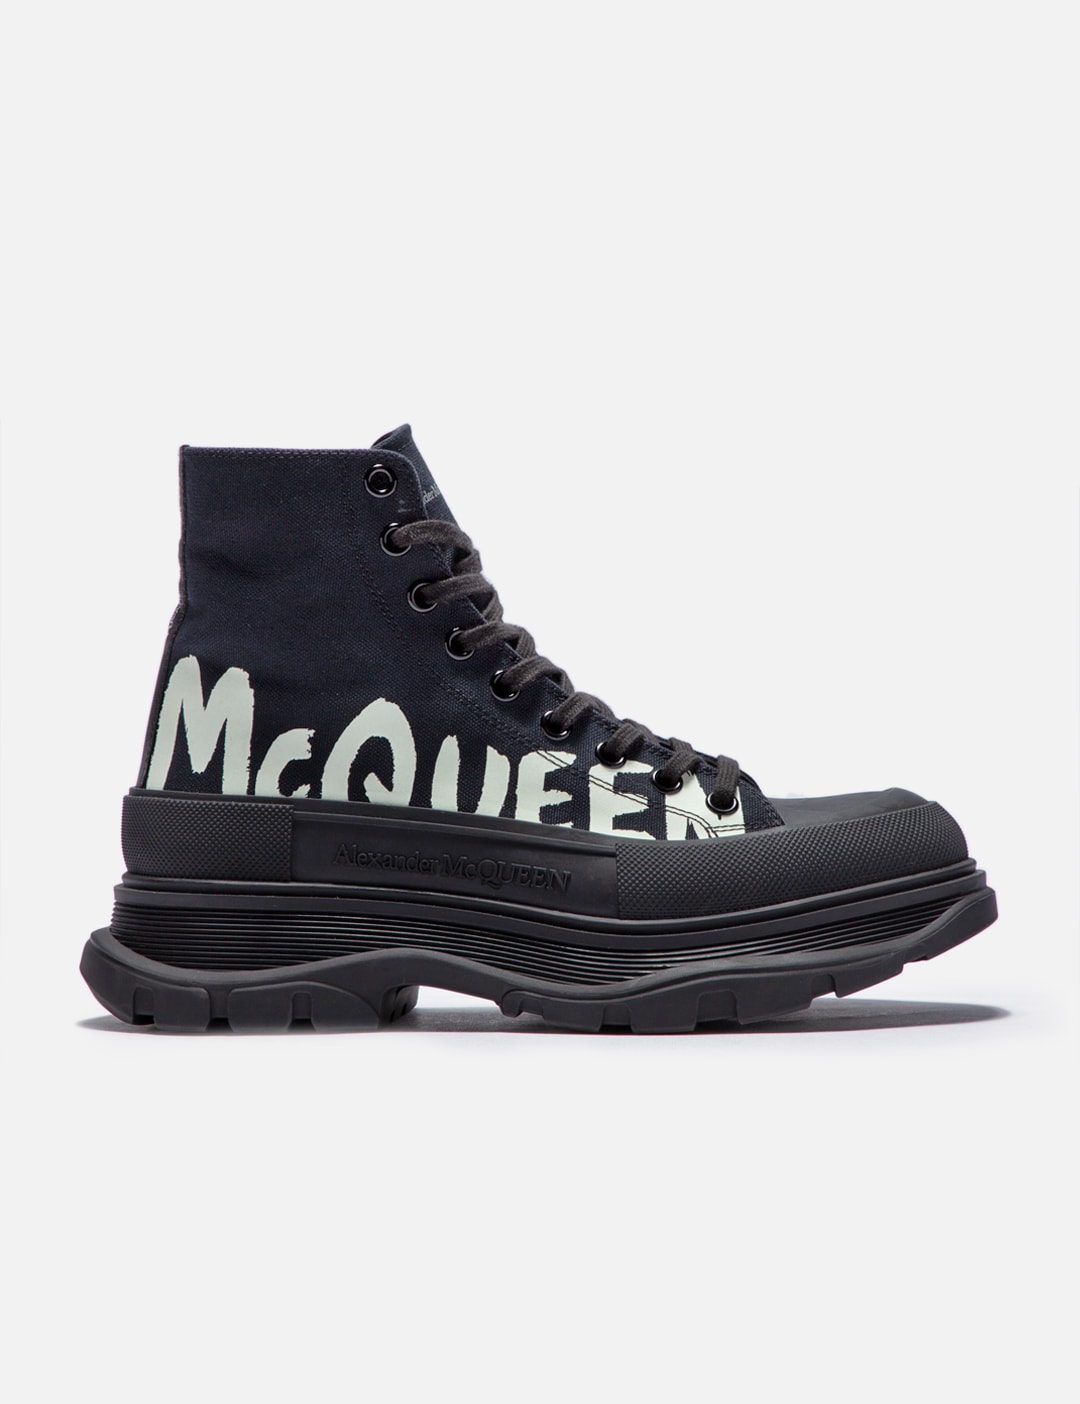 McQ Alexander McQueen - Alexander Slick Boots | HBX - Curated Fashion Lifestyle by Hypebeast